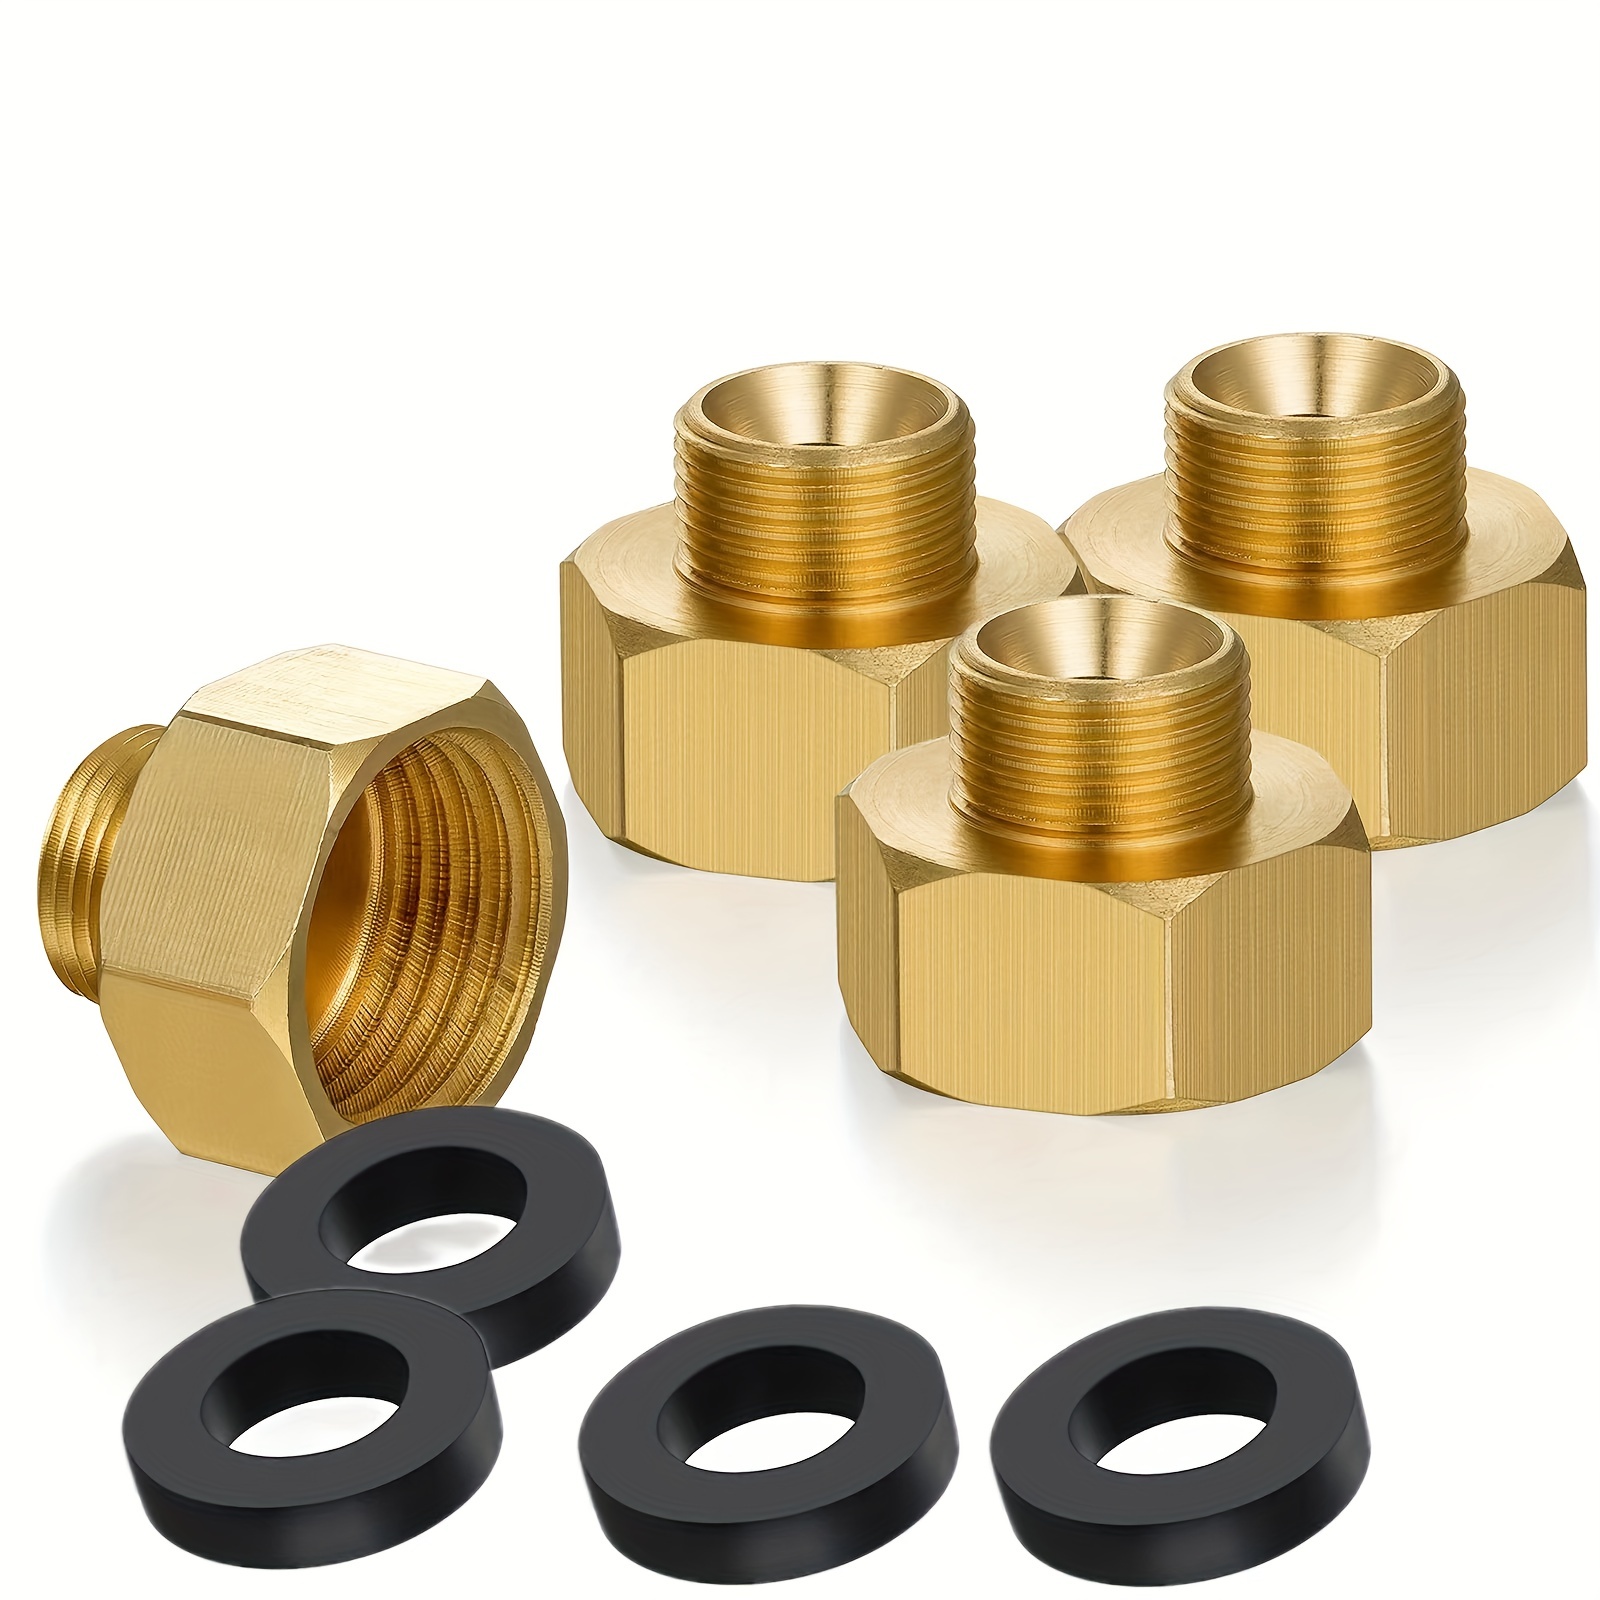 Brass Fitting (Inches Size) Compression Male Connector Compression